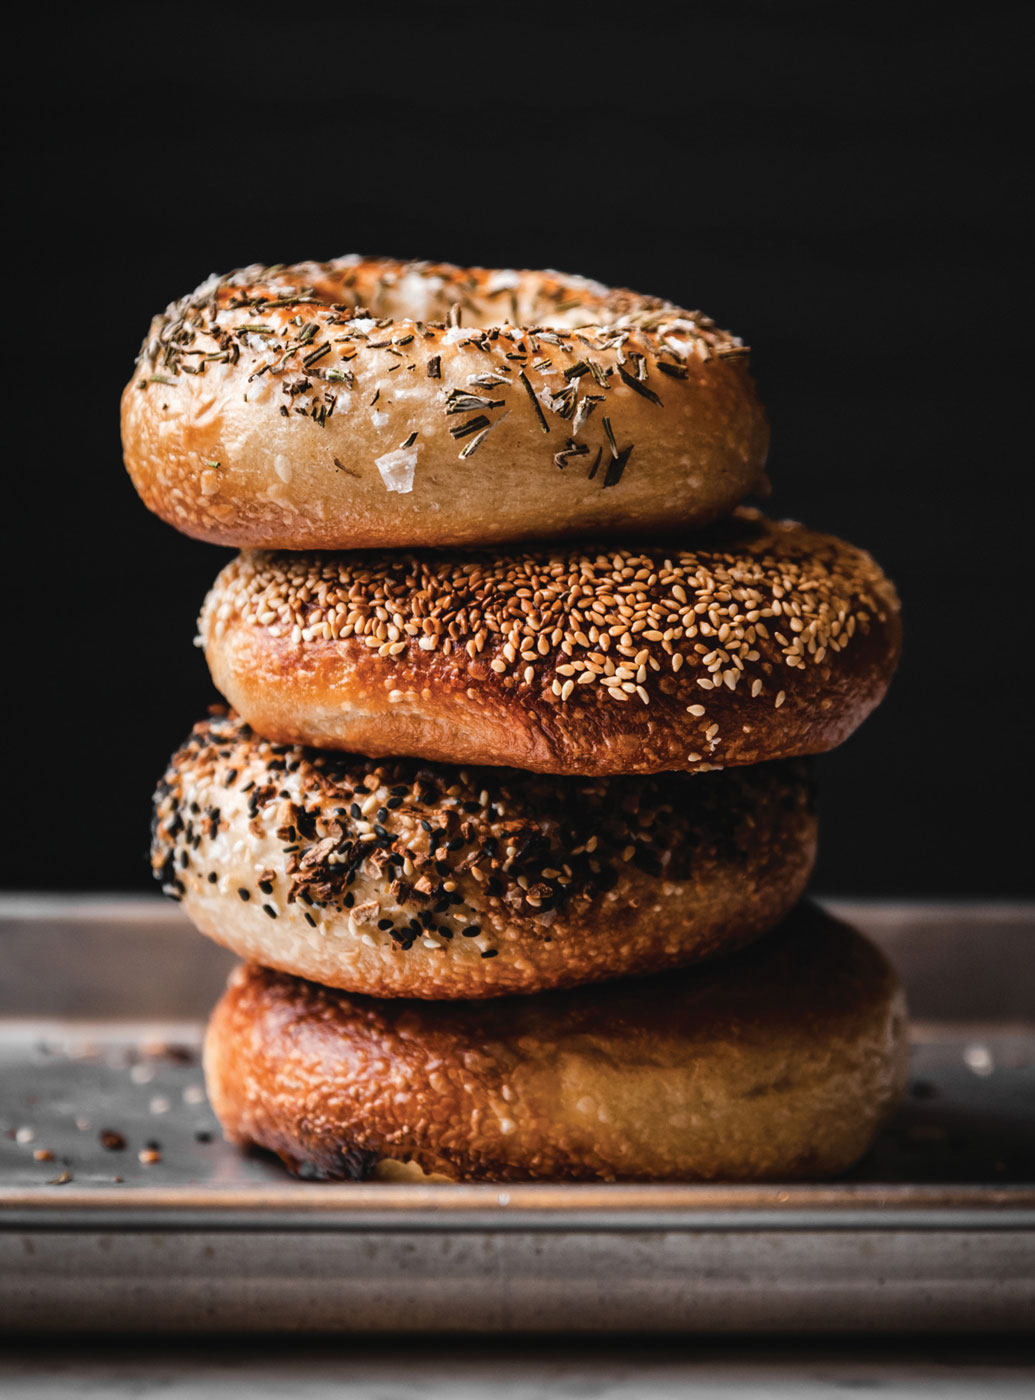 A partnership with Fusian gave Lox Bagel Shop a chance to offer delivery of its bagels. Photo by Edible Columbus.